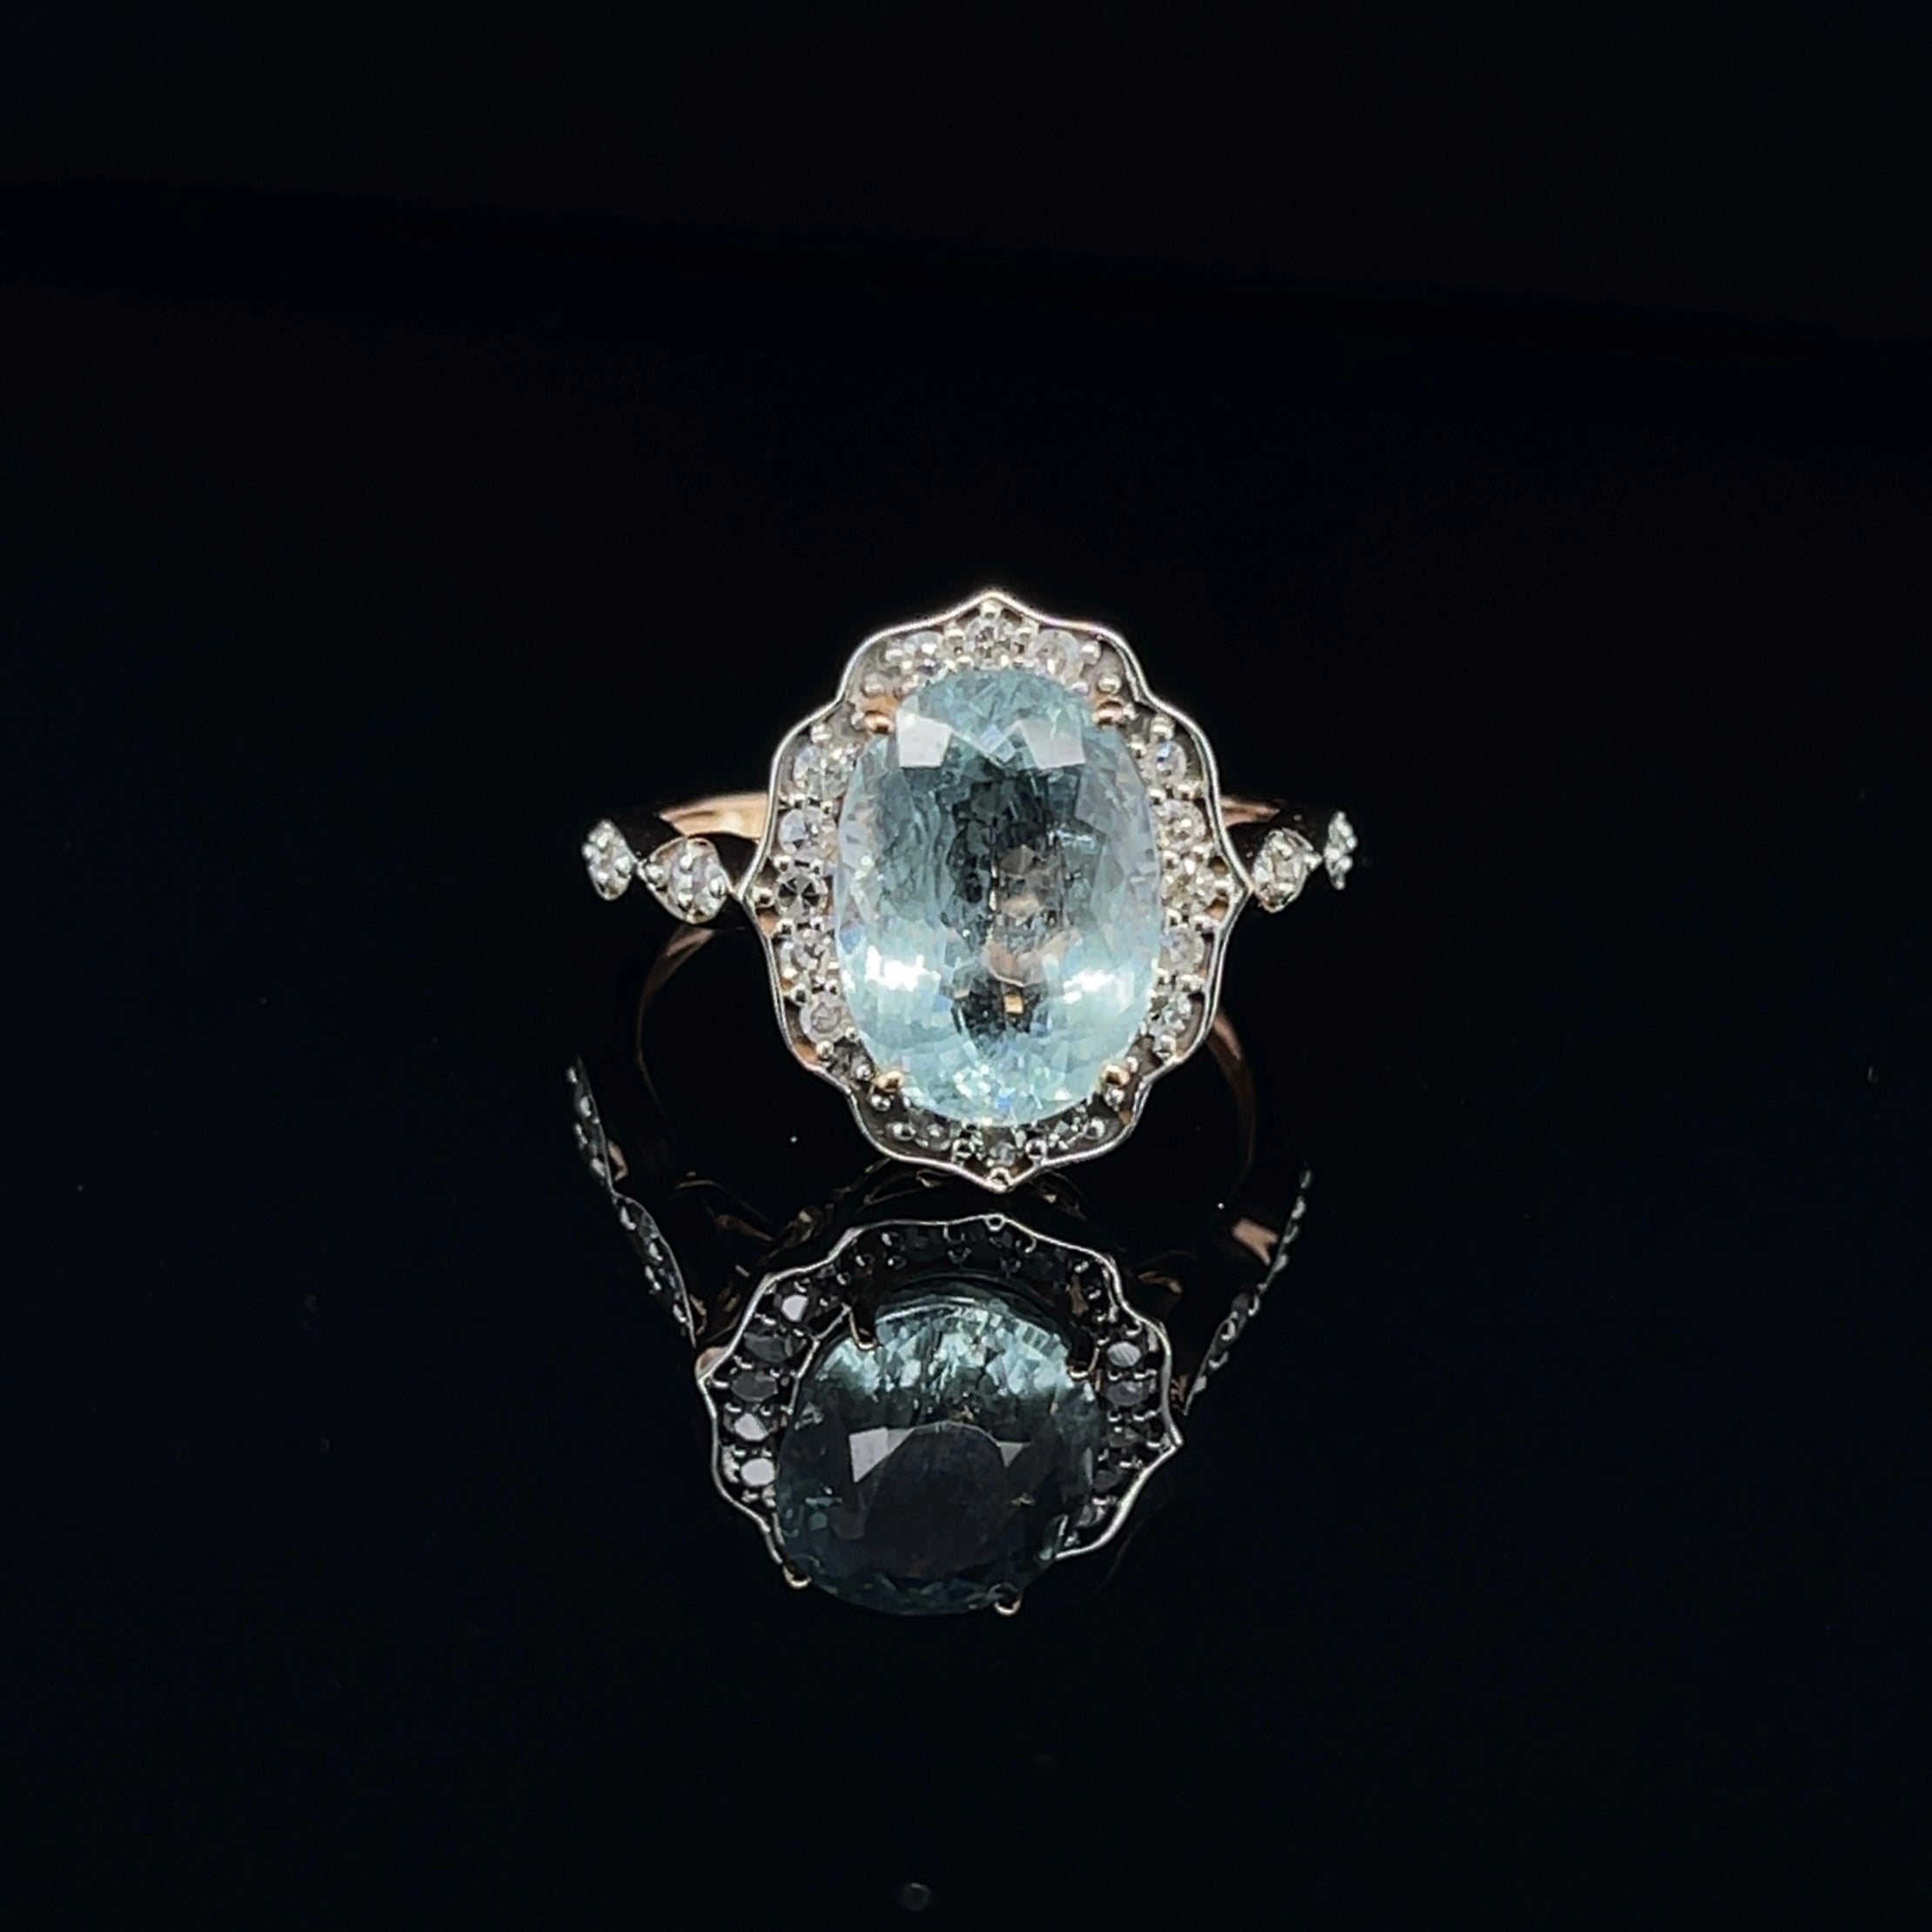 For Sale:  18ct Rose Gold Ring with 3.11ct Aquamarine and Diamond 6